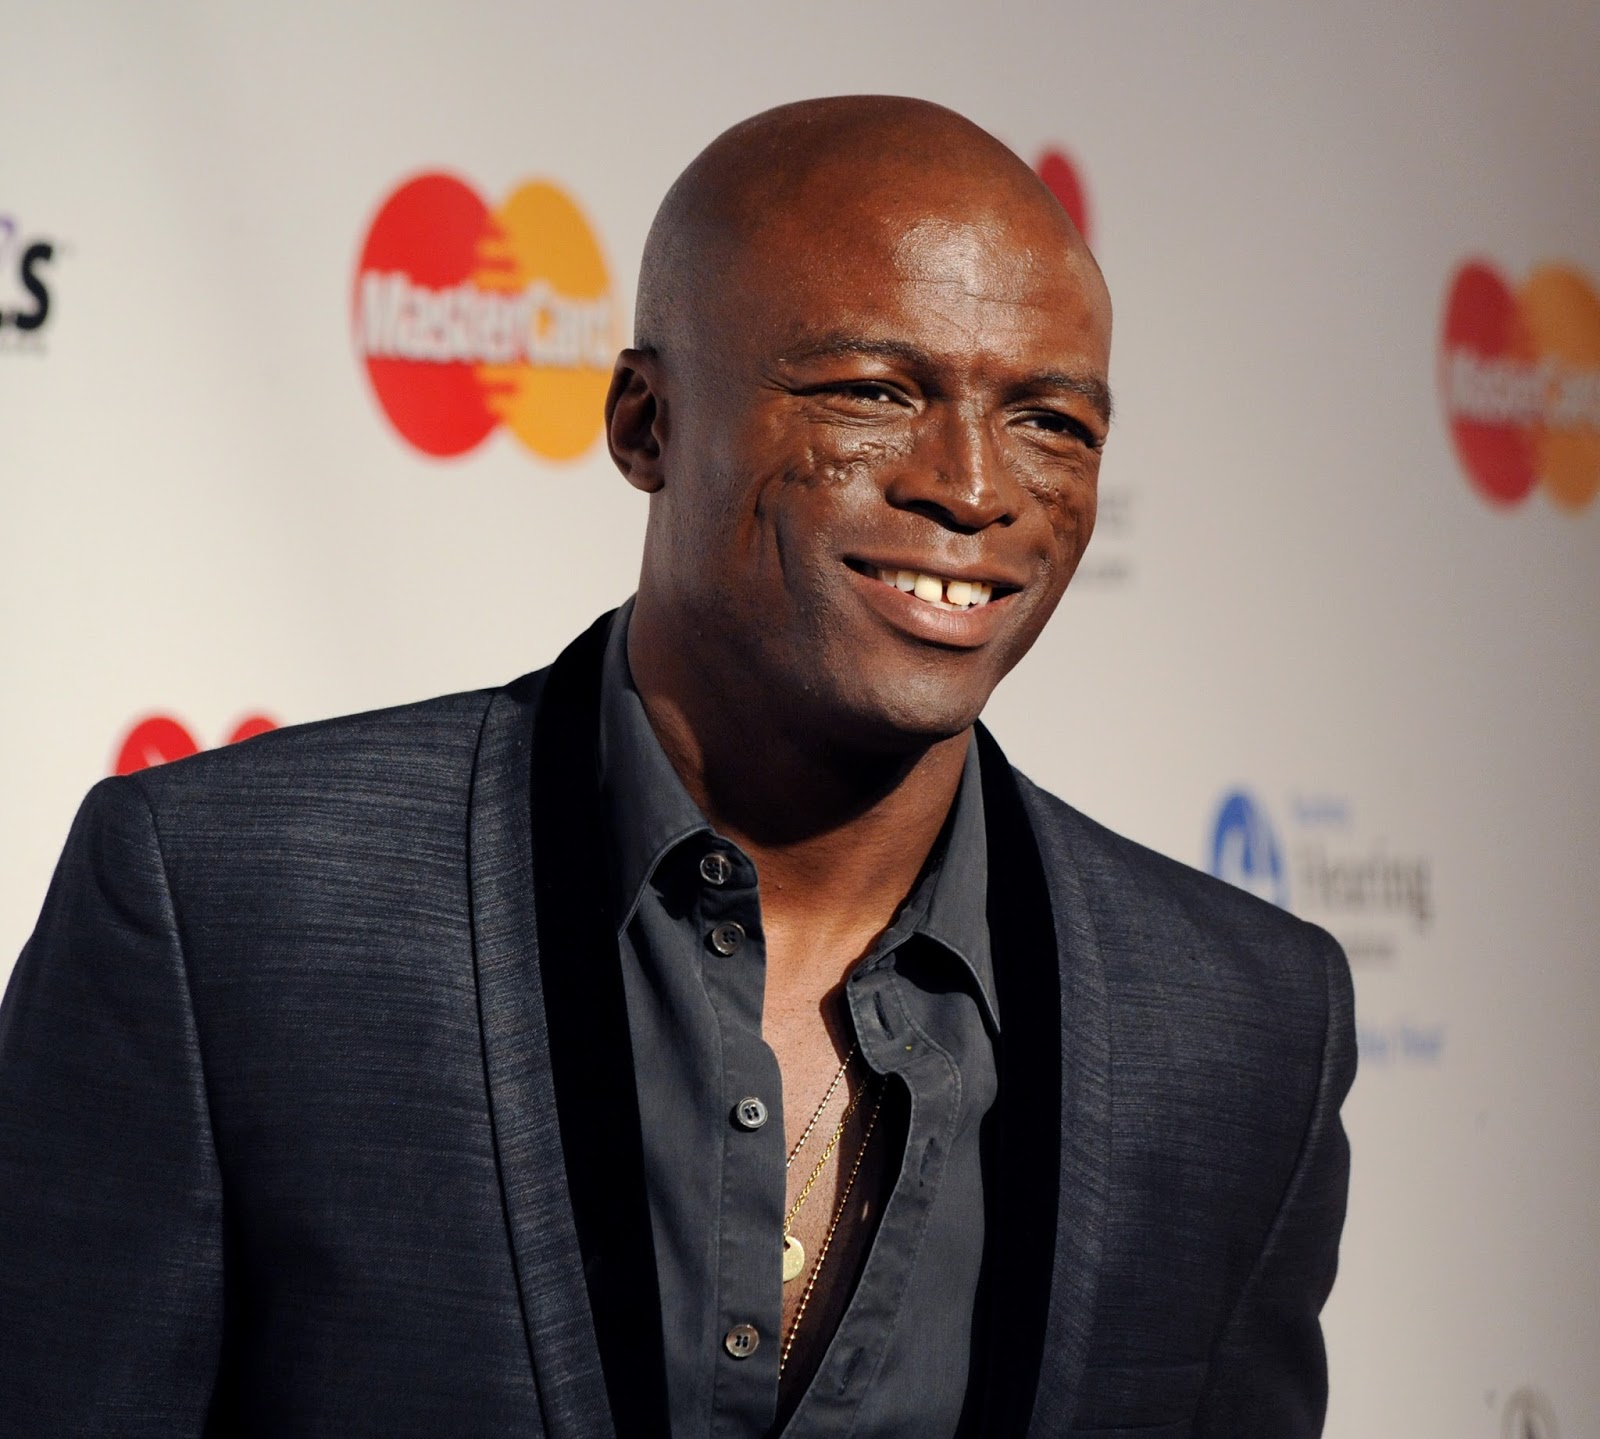 New Album Releases: SEAL 7 (Seal) | The Entertainment Factor